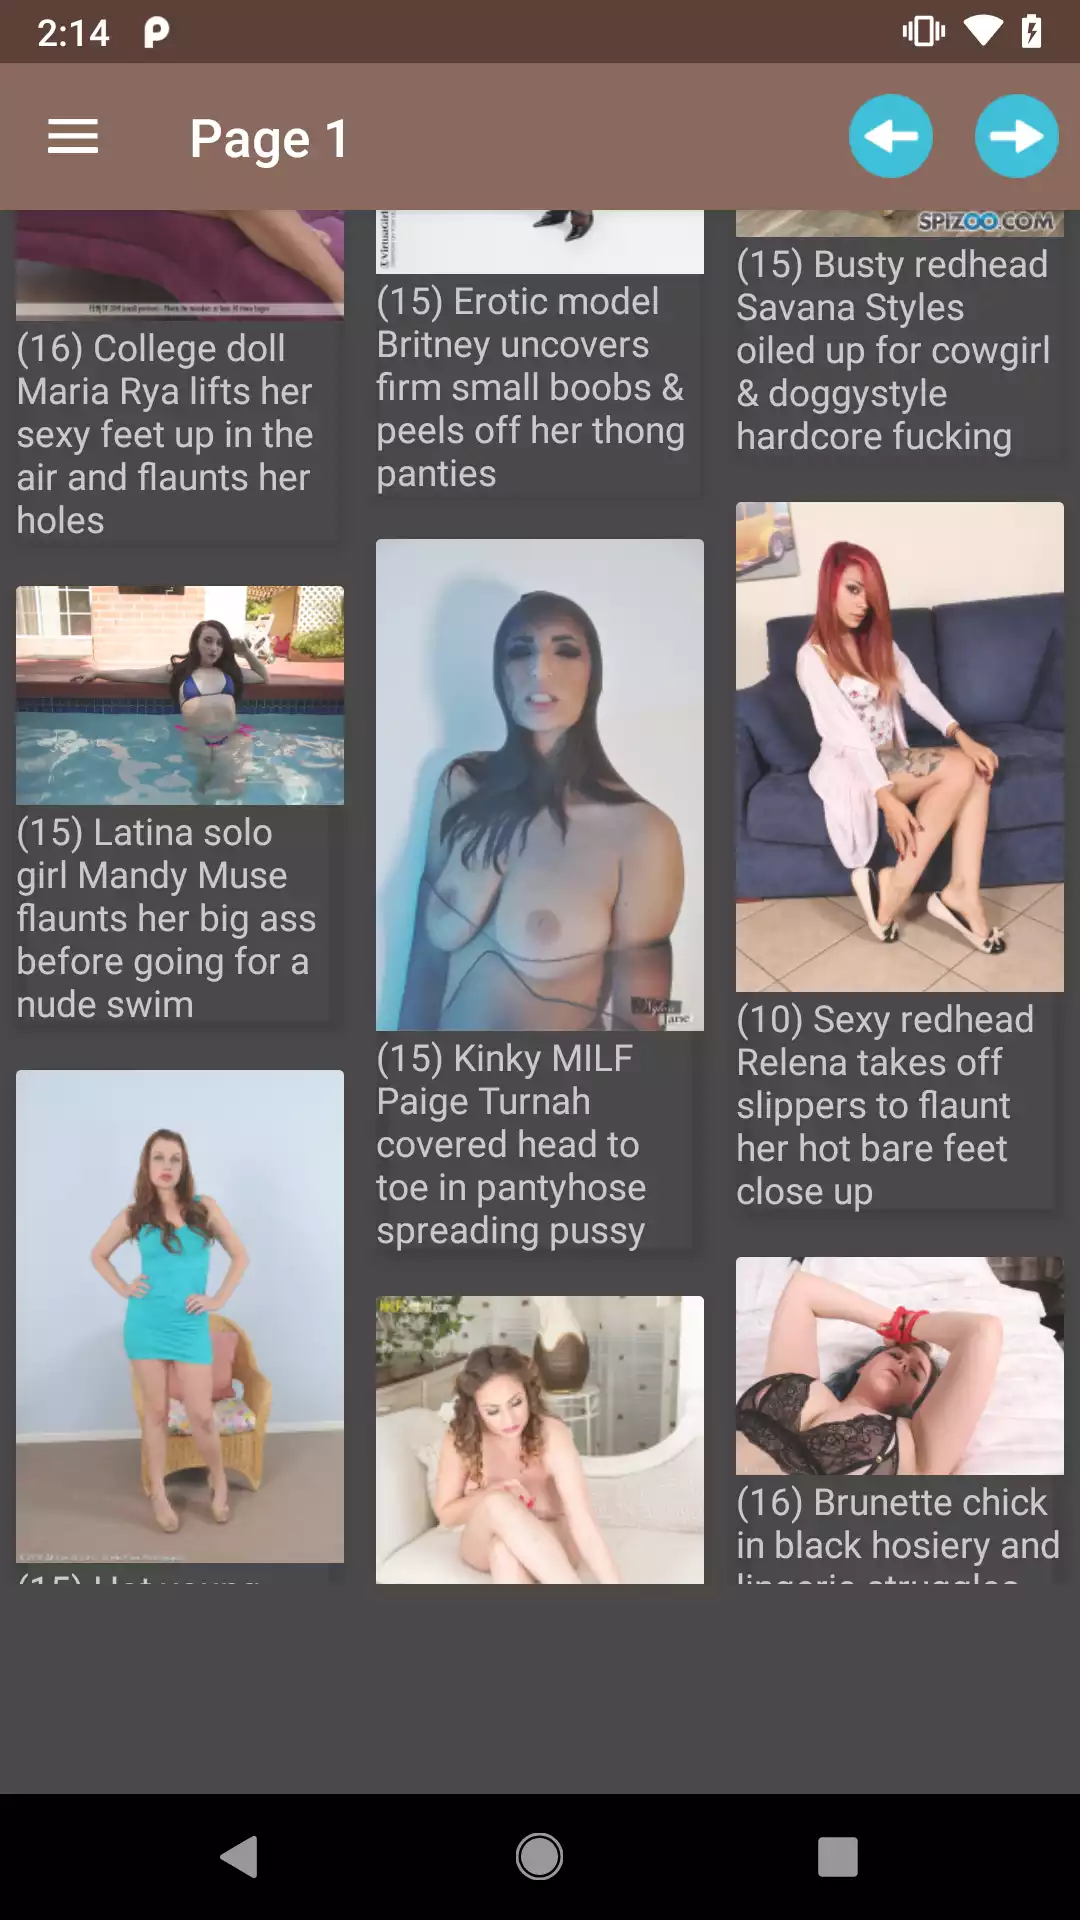 Foot Fetish galleries,caprice,app,henta,anime,sexy,best,pictures,apk,texas,photos,alexis,doujinshi,apps,android,hentie,pornstar,adult,puzzle,porn,market,play,hentai